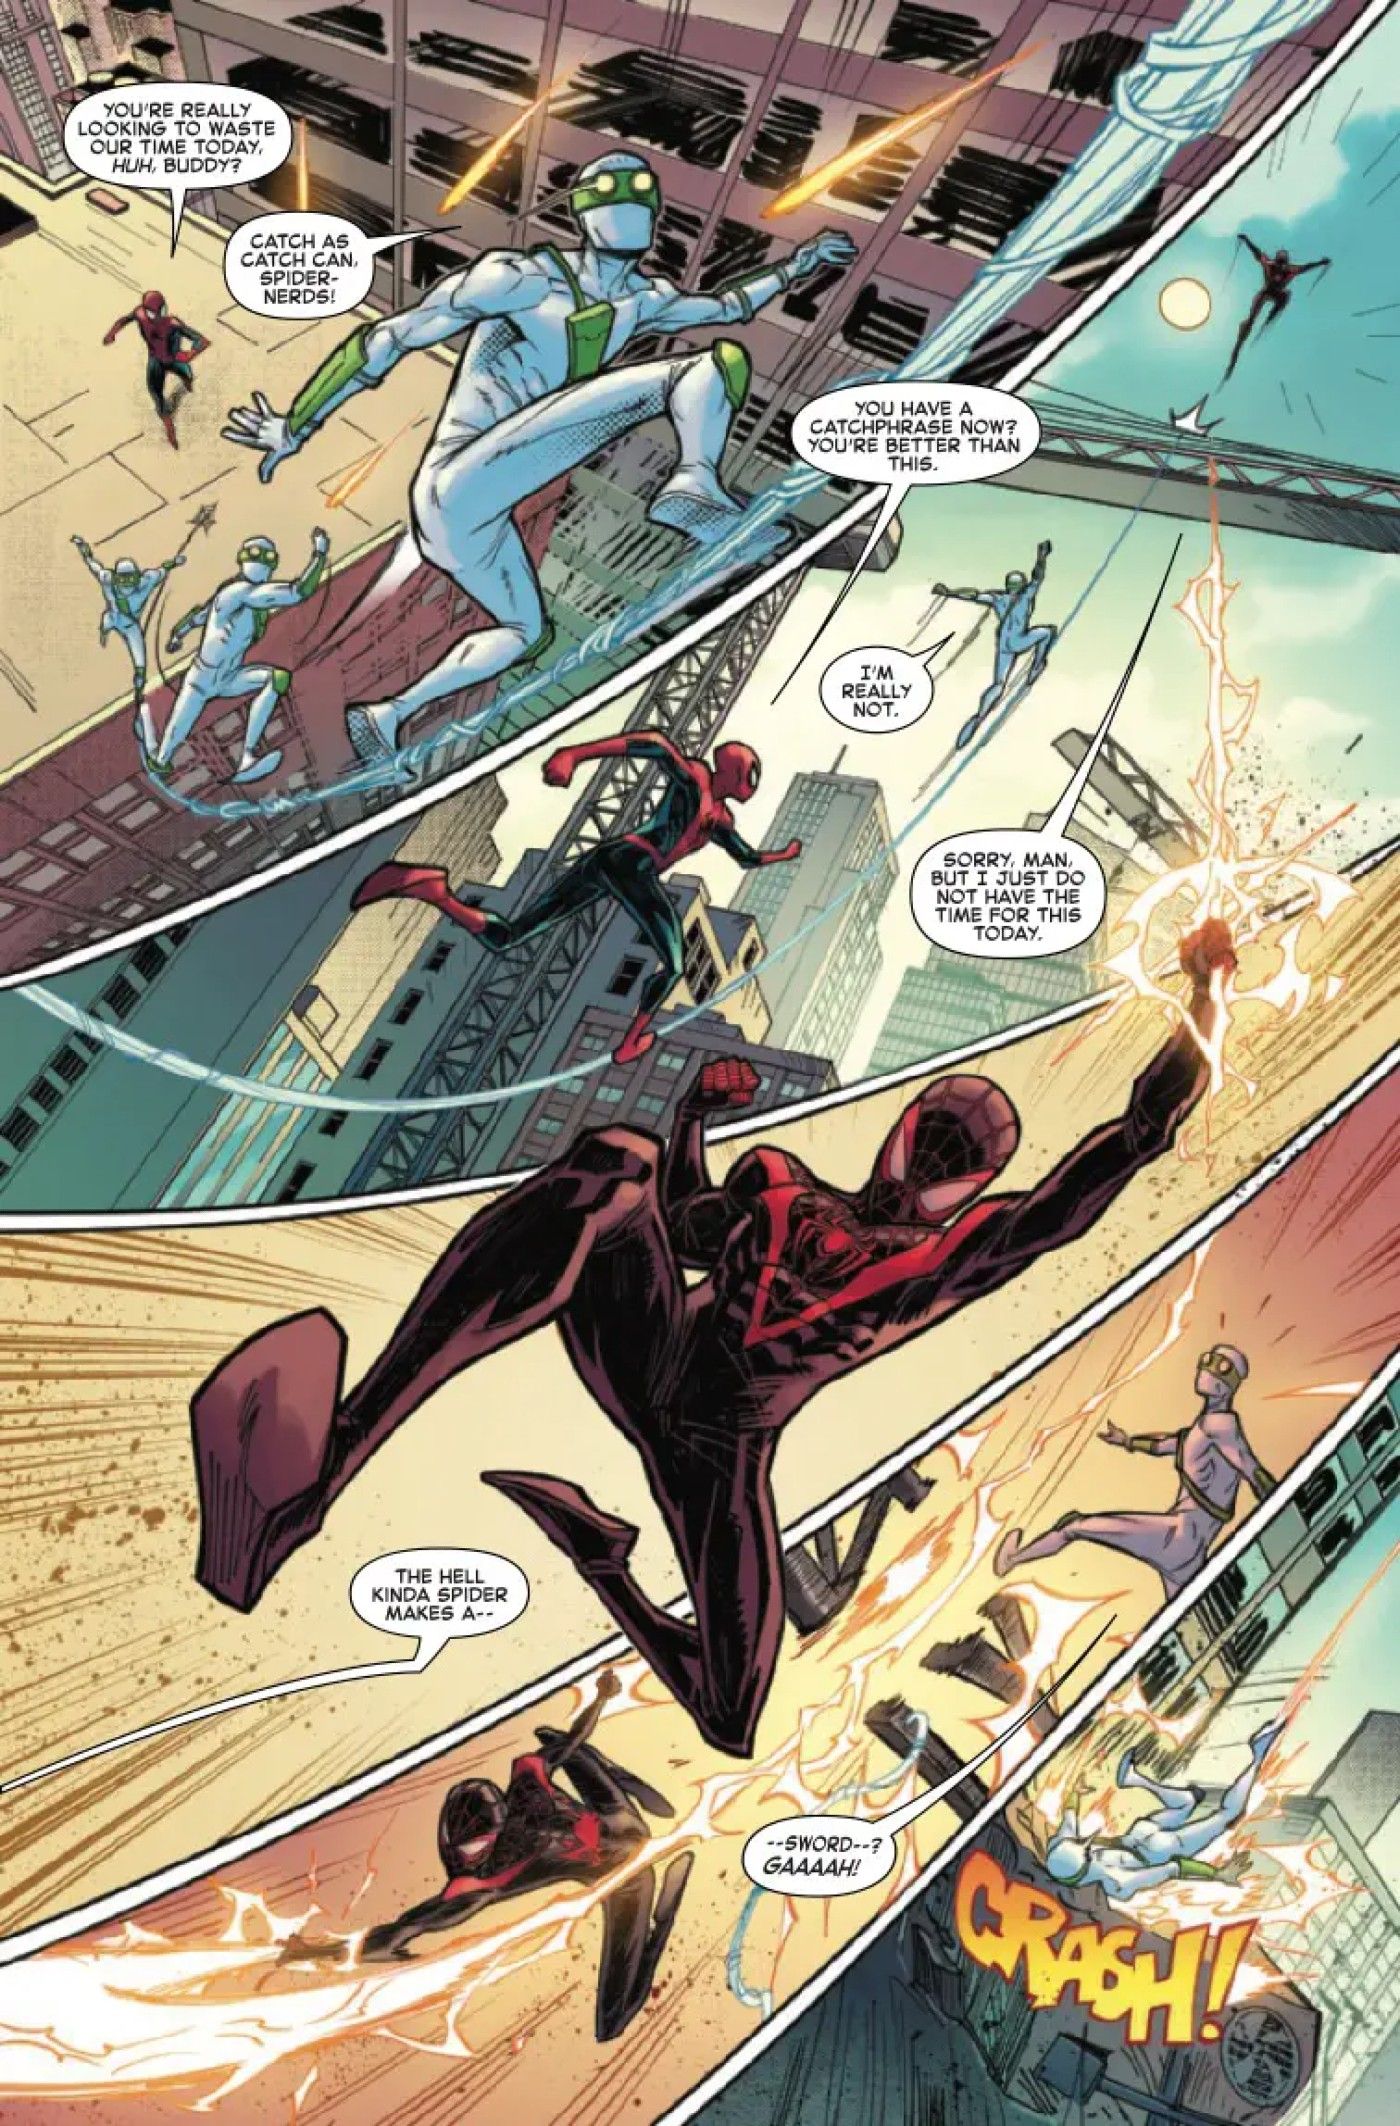 Miles Morales: Controversial Spider-Man Comic Shows Limits of Marvel